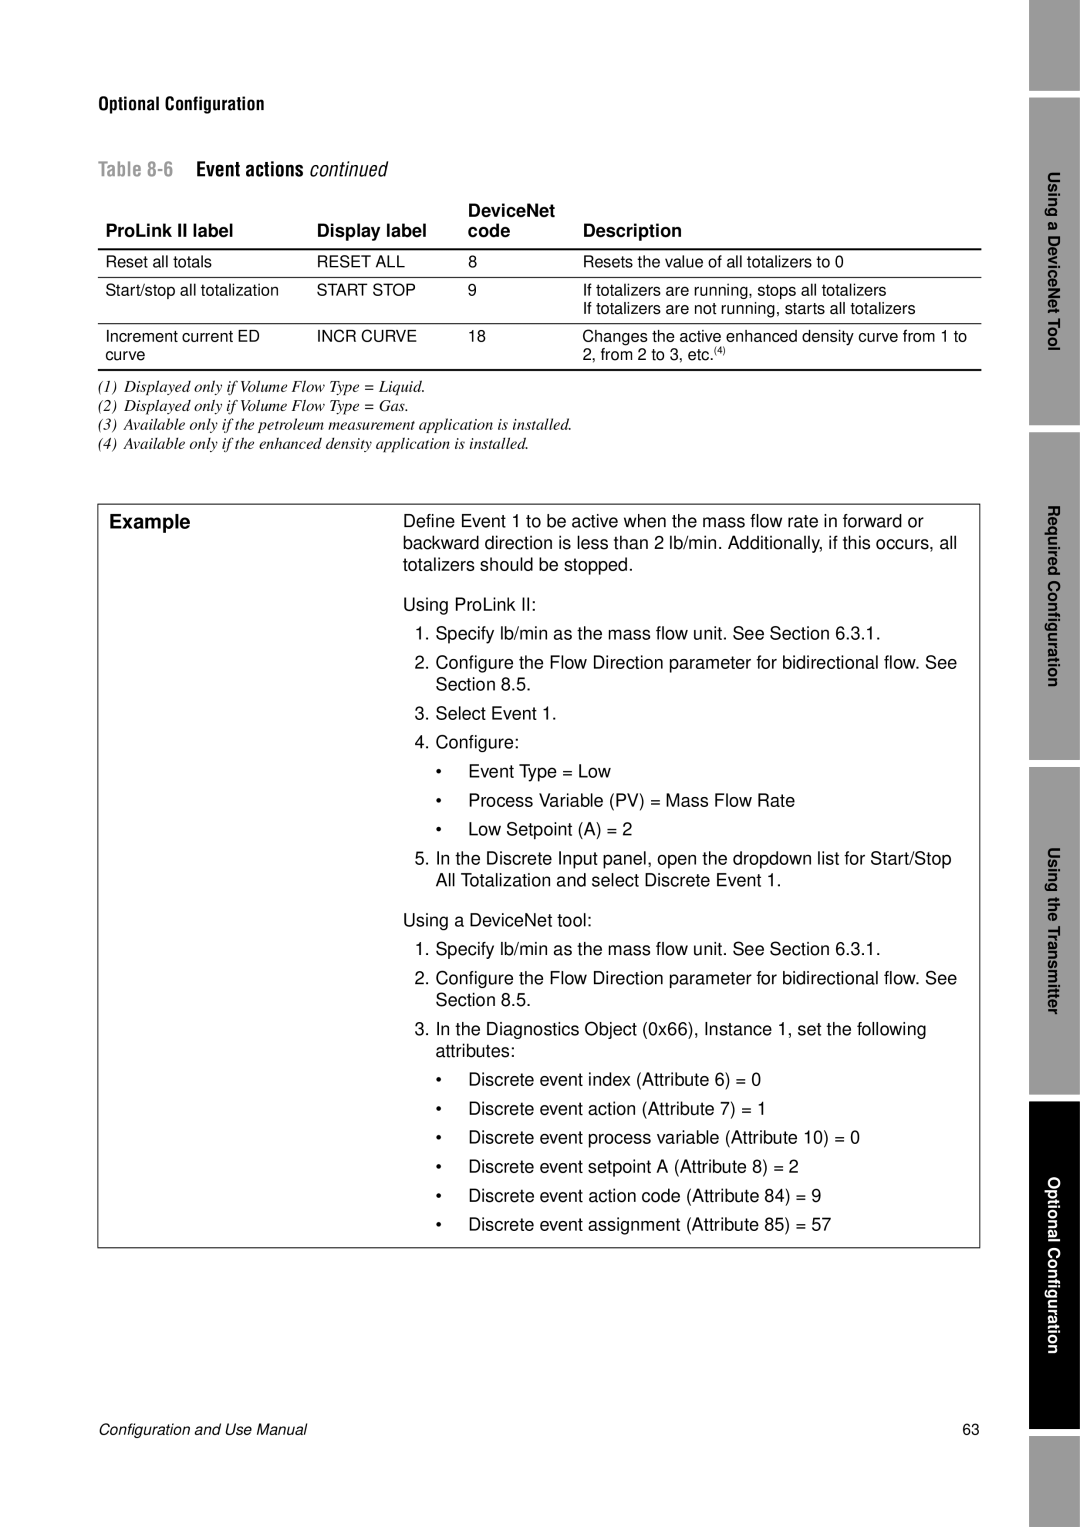 Emerson Process Management 2400S manual 6 Event actions continued, Example 